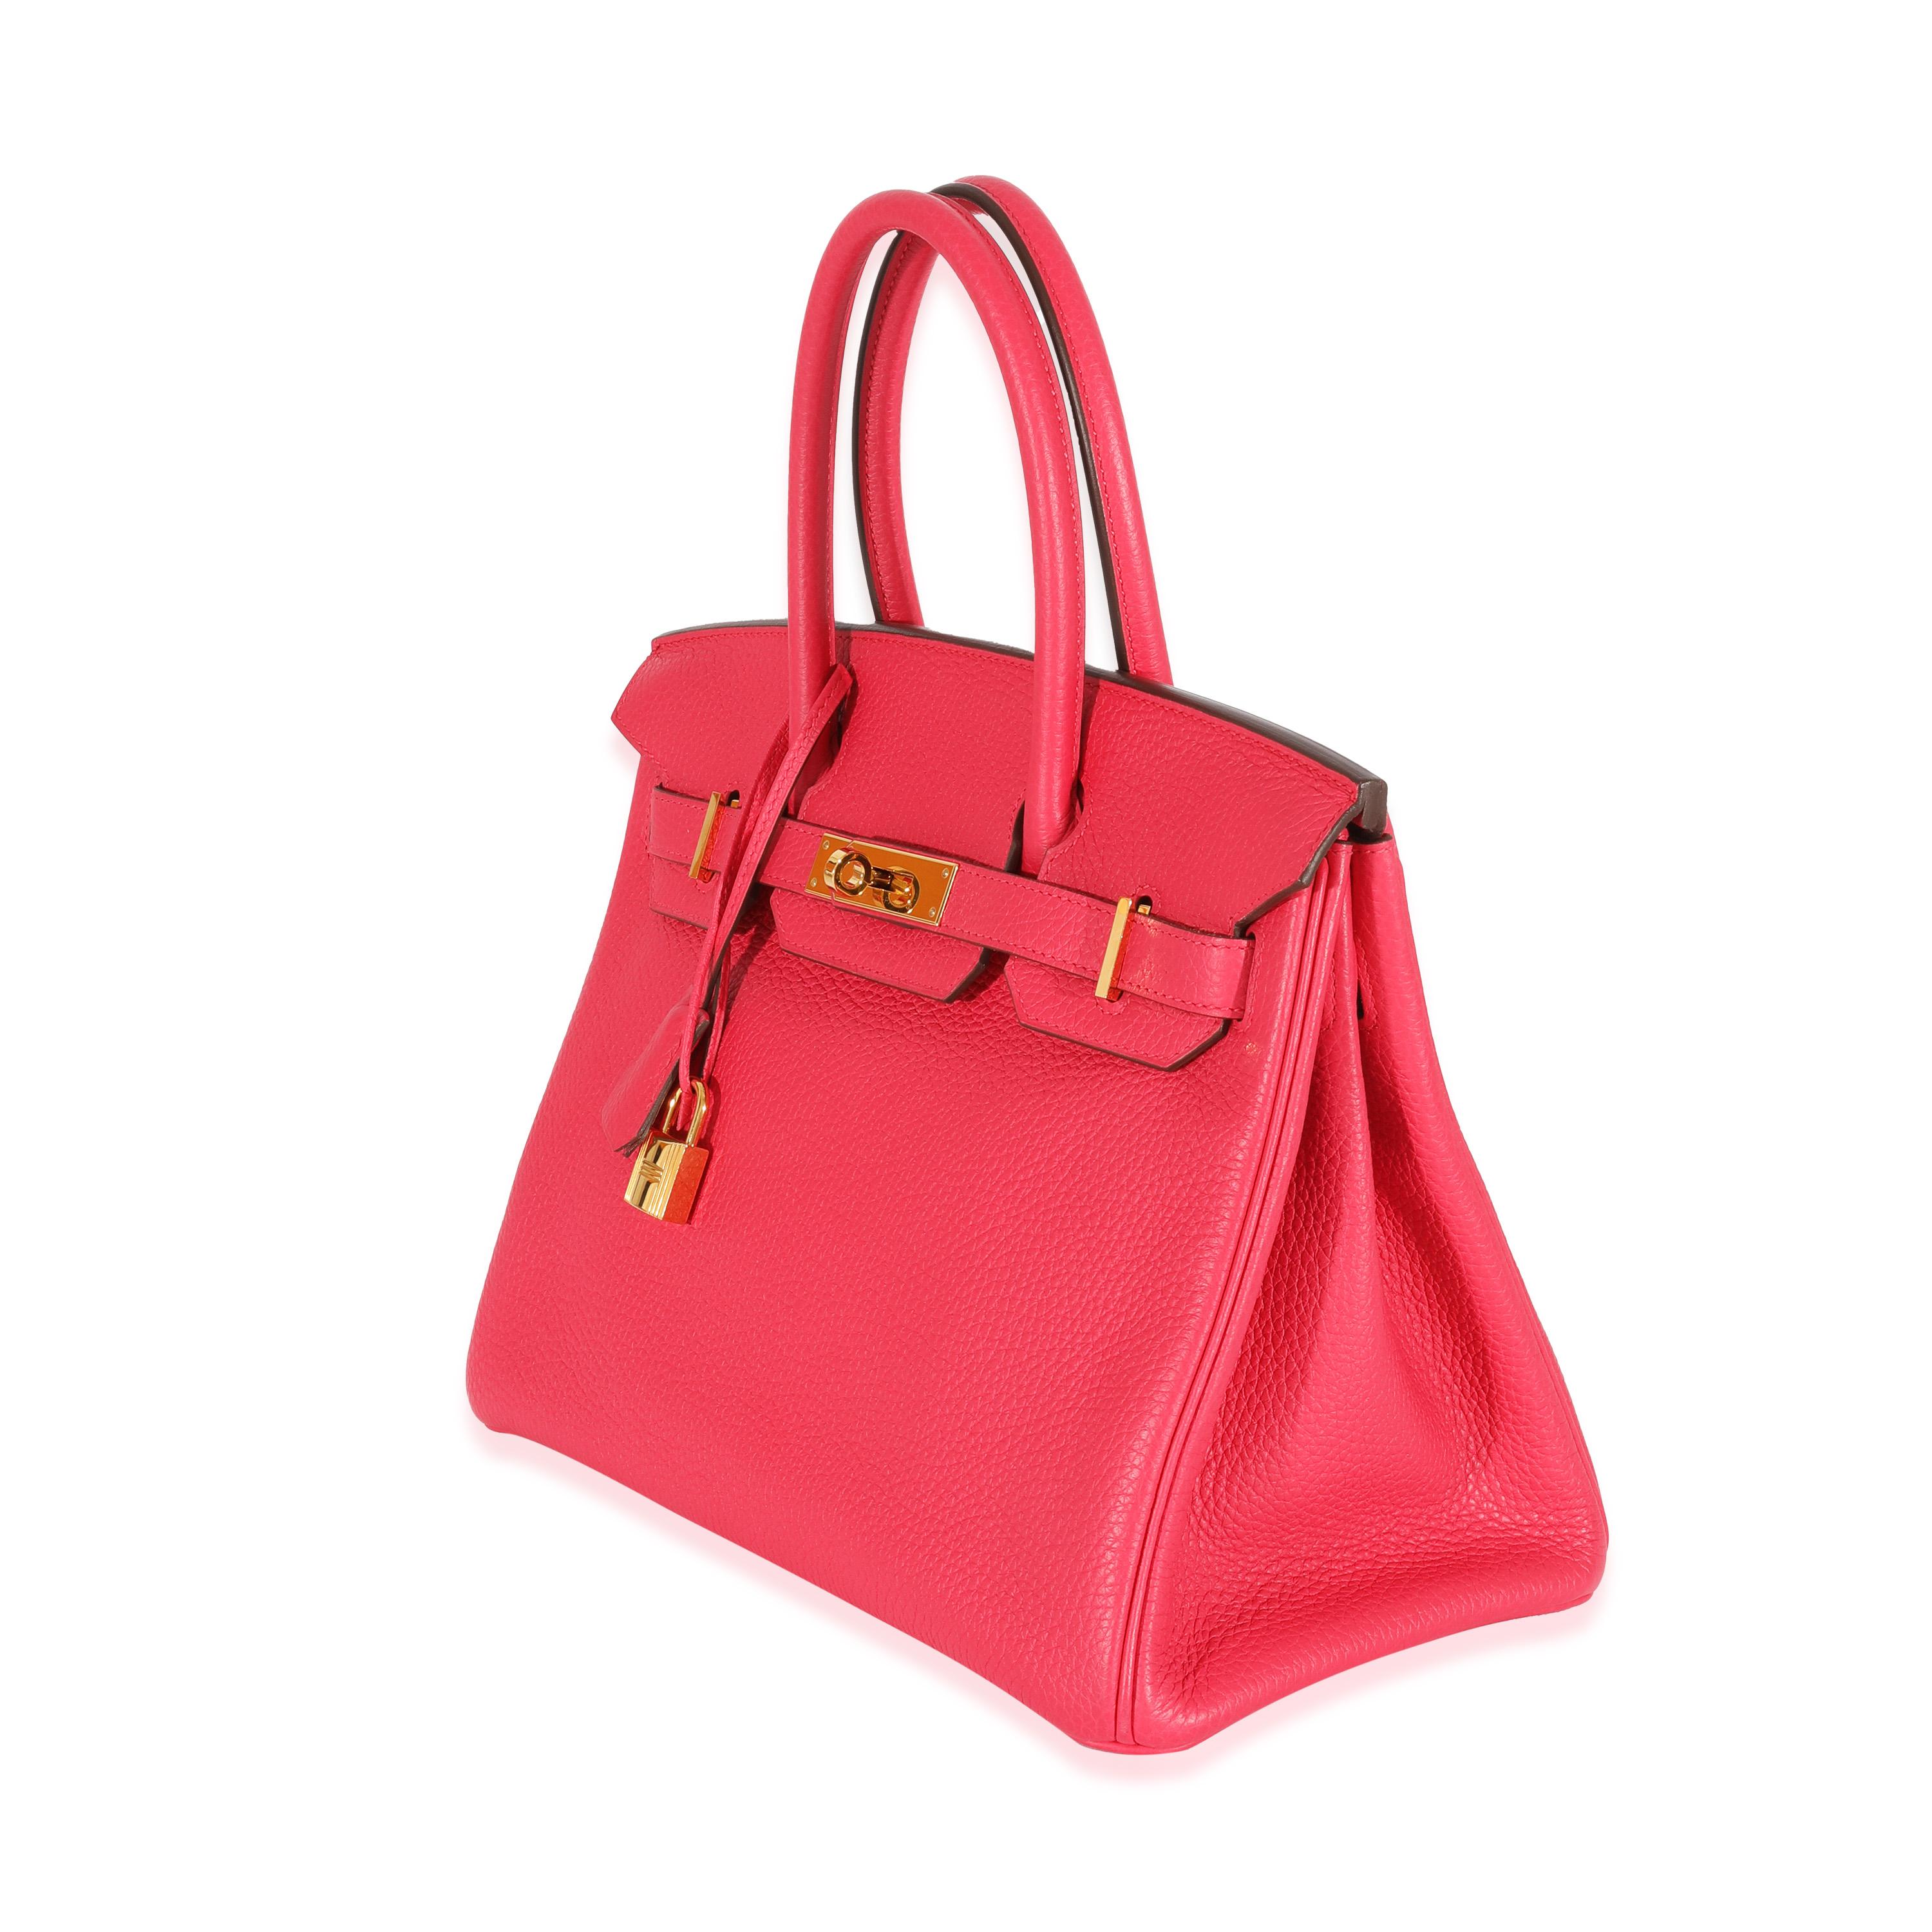 Hermes Clemence Rose Extreme Birkin 30 GHW In Excellent Condition For Sale In New York, NY